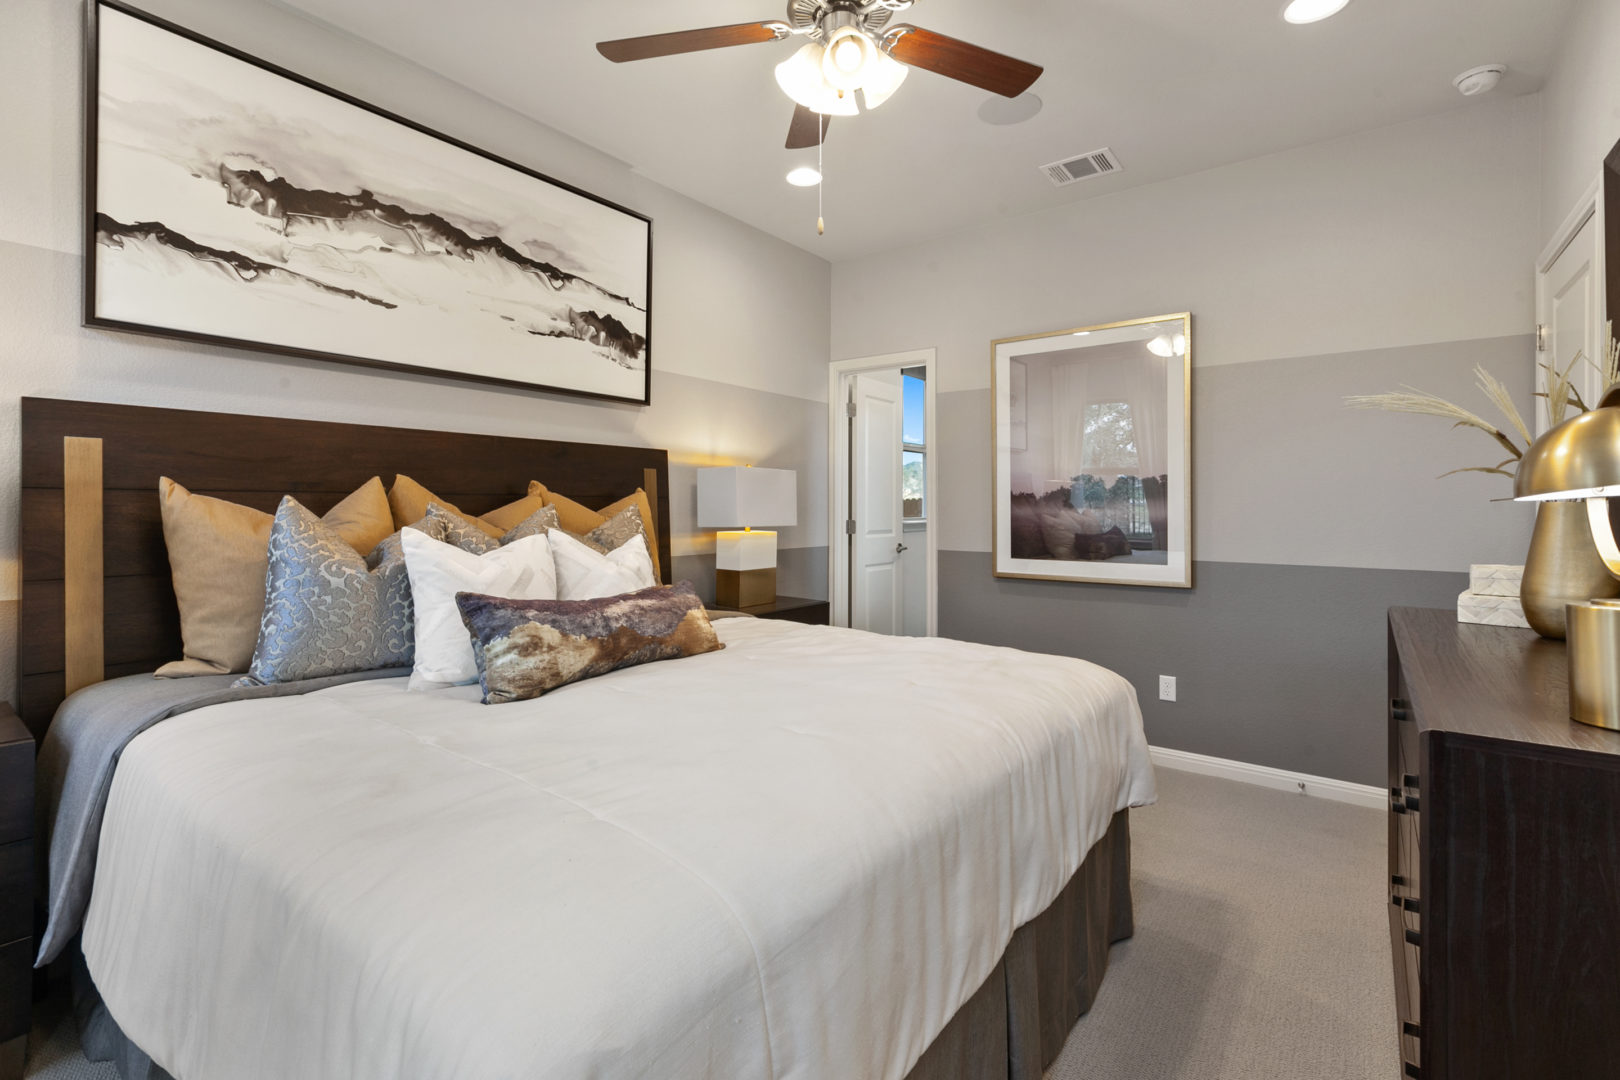 The Liberty Portico Series Master Bedroom